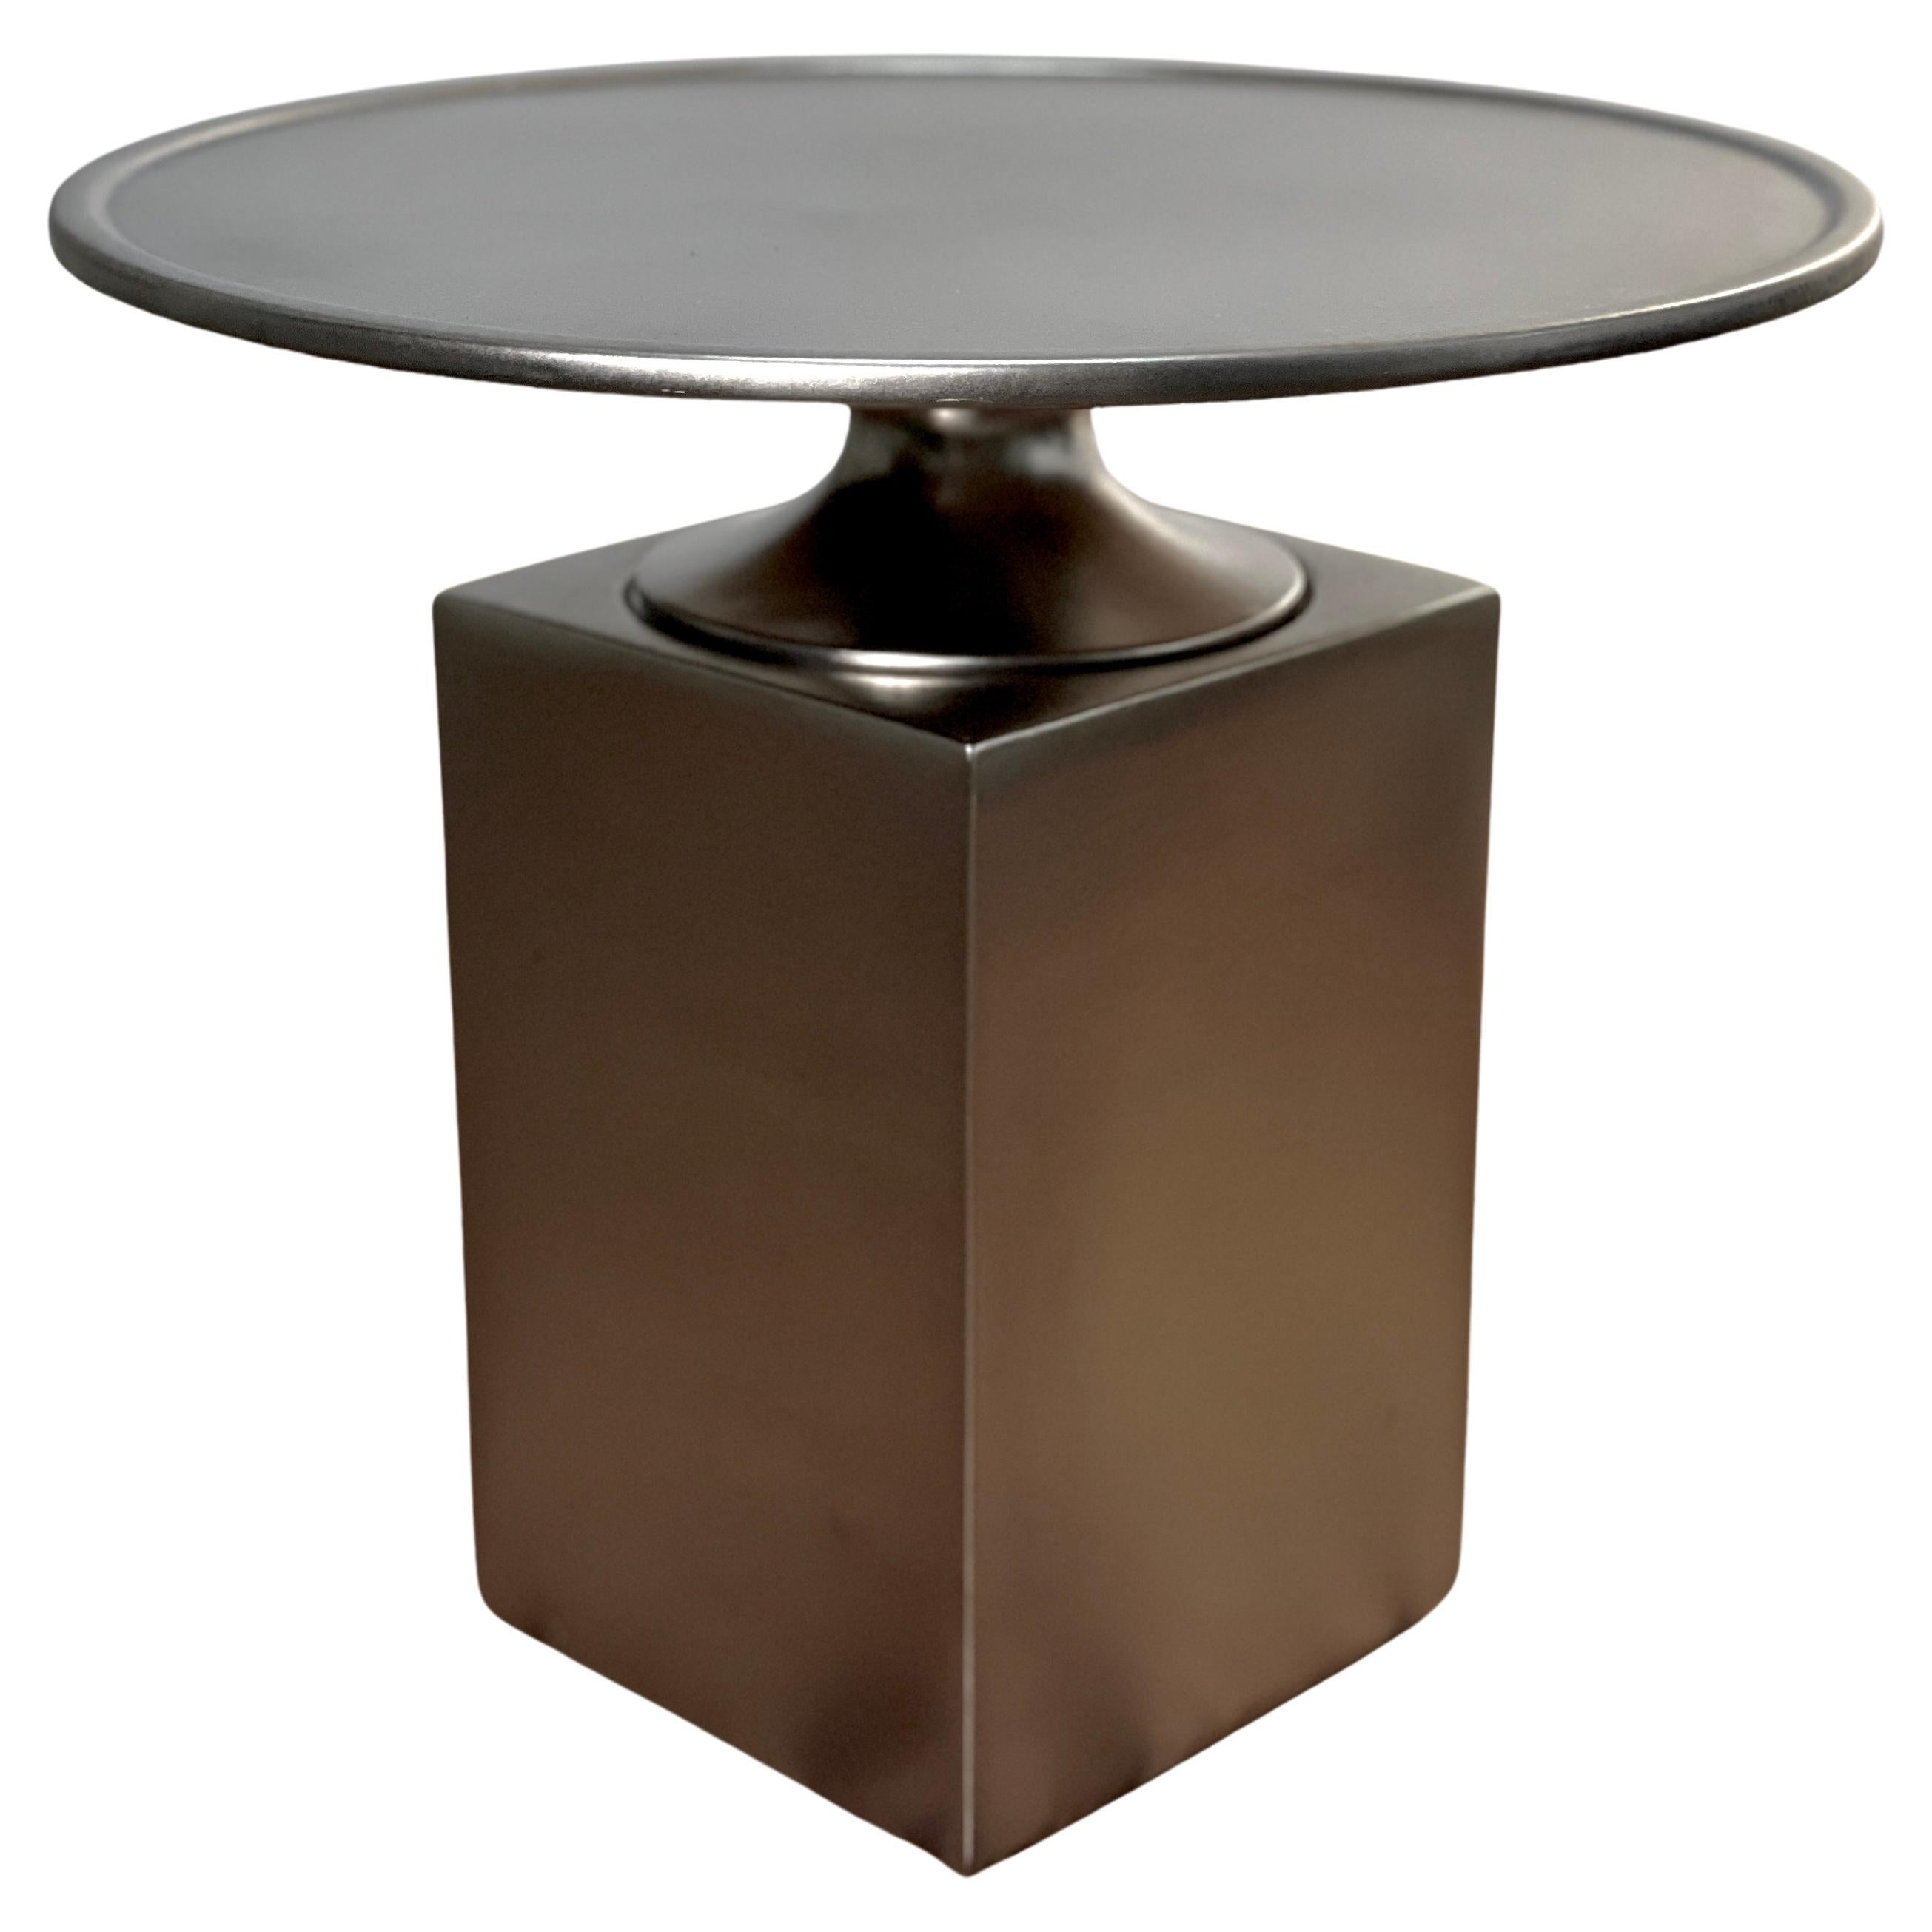 Table d'appoint OUK Christophe Delcourt 